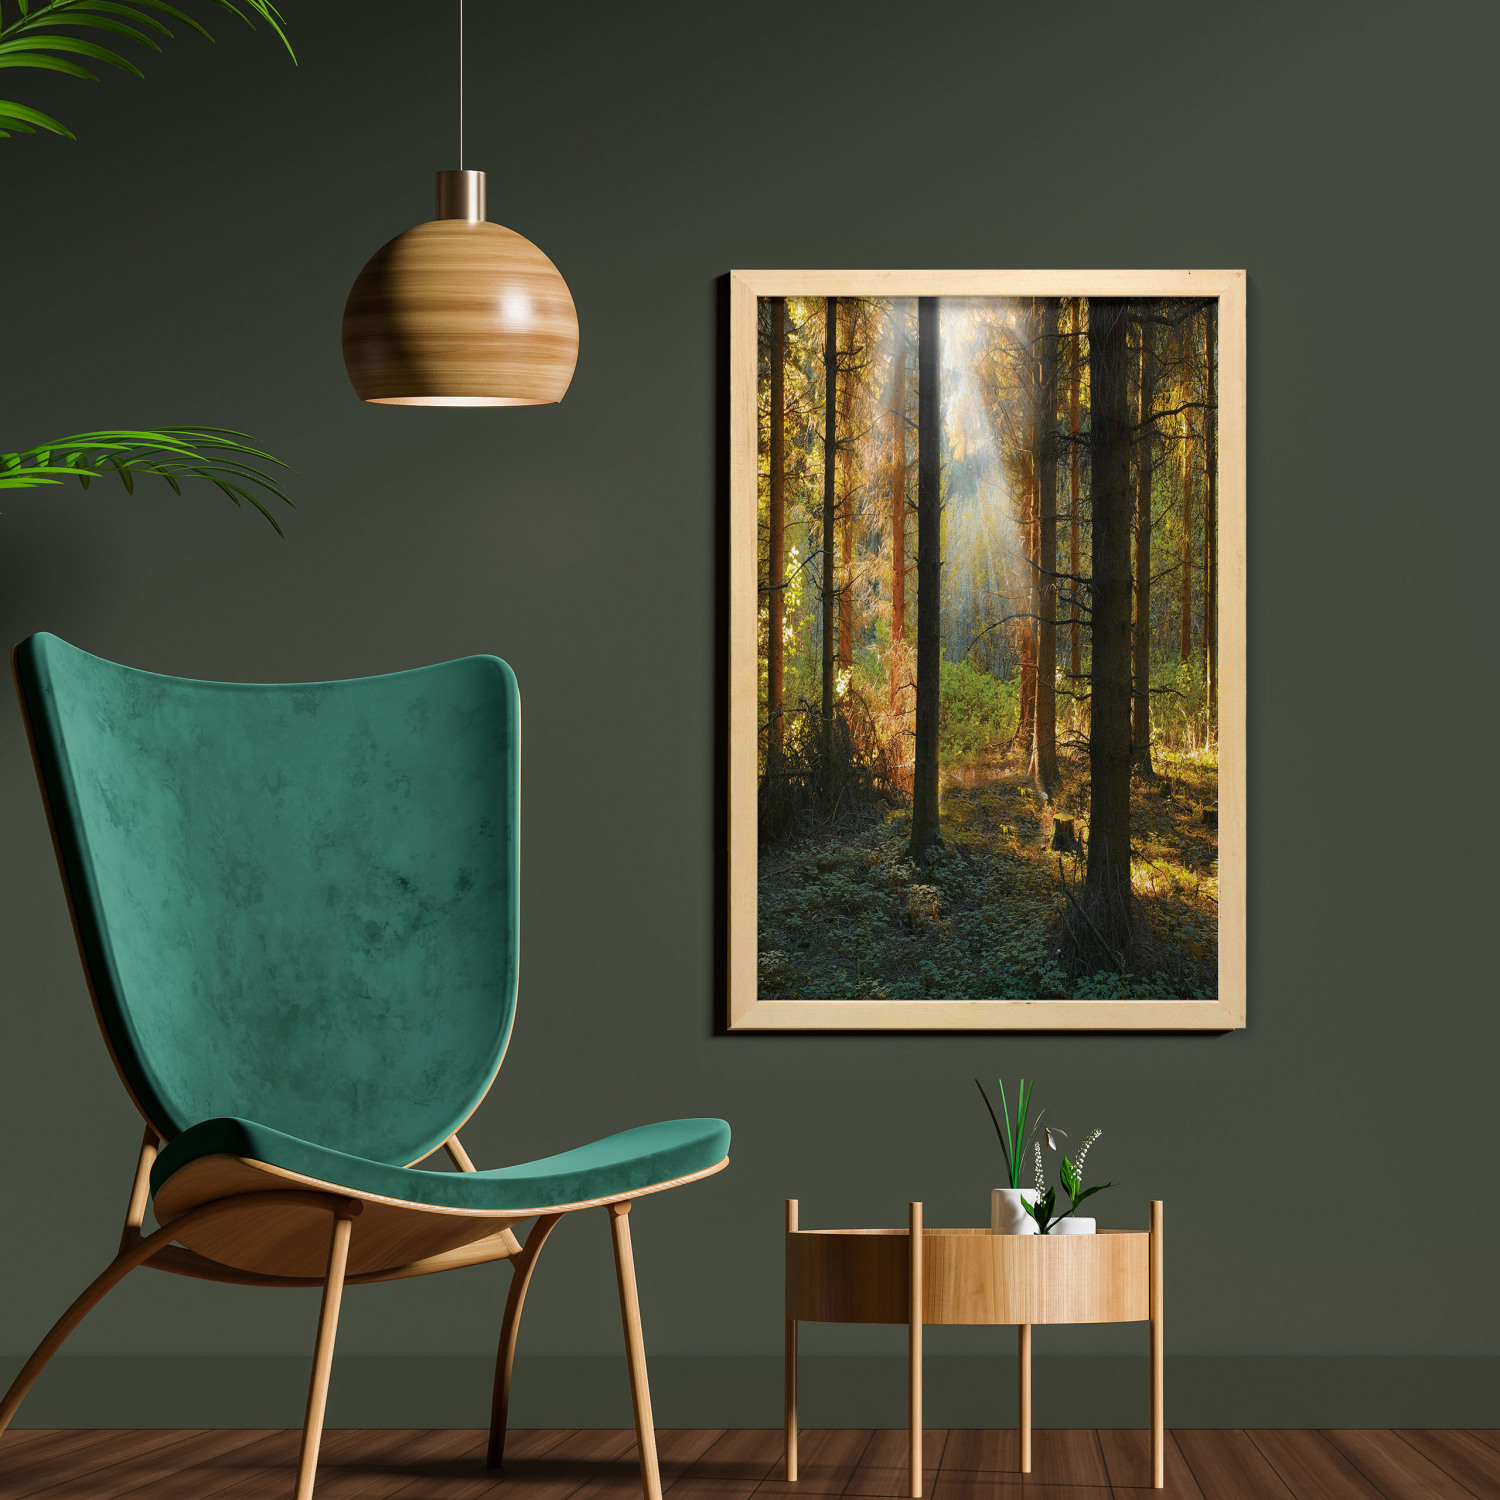 Forest Wall Art with Frame, Sunset View of Dark Pine Woodland in Autumn Foggy Scene Sunbeams Trunks Shadow, Printed Fabric Poster for Bathroom Living Room, 23" x 35", Orange Green, by Ambesonne - image 2 of 2